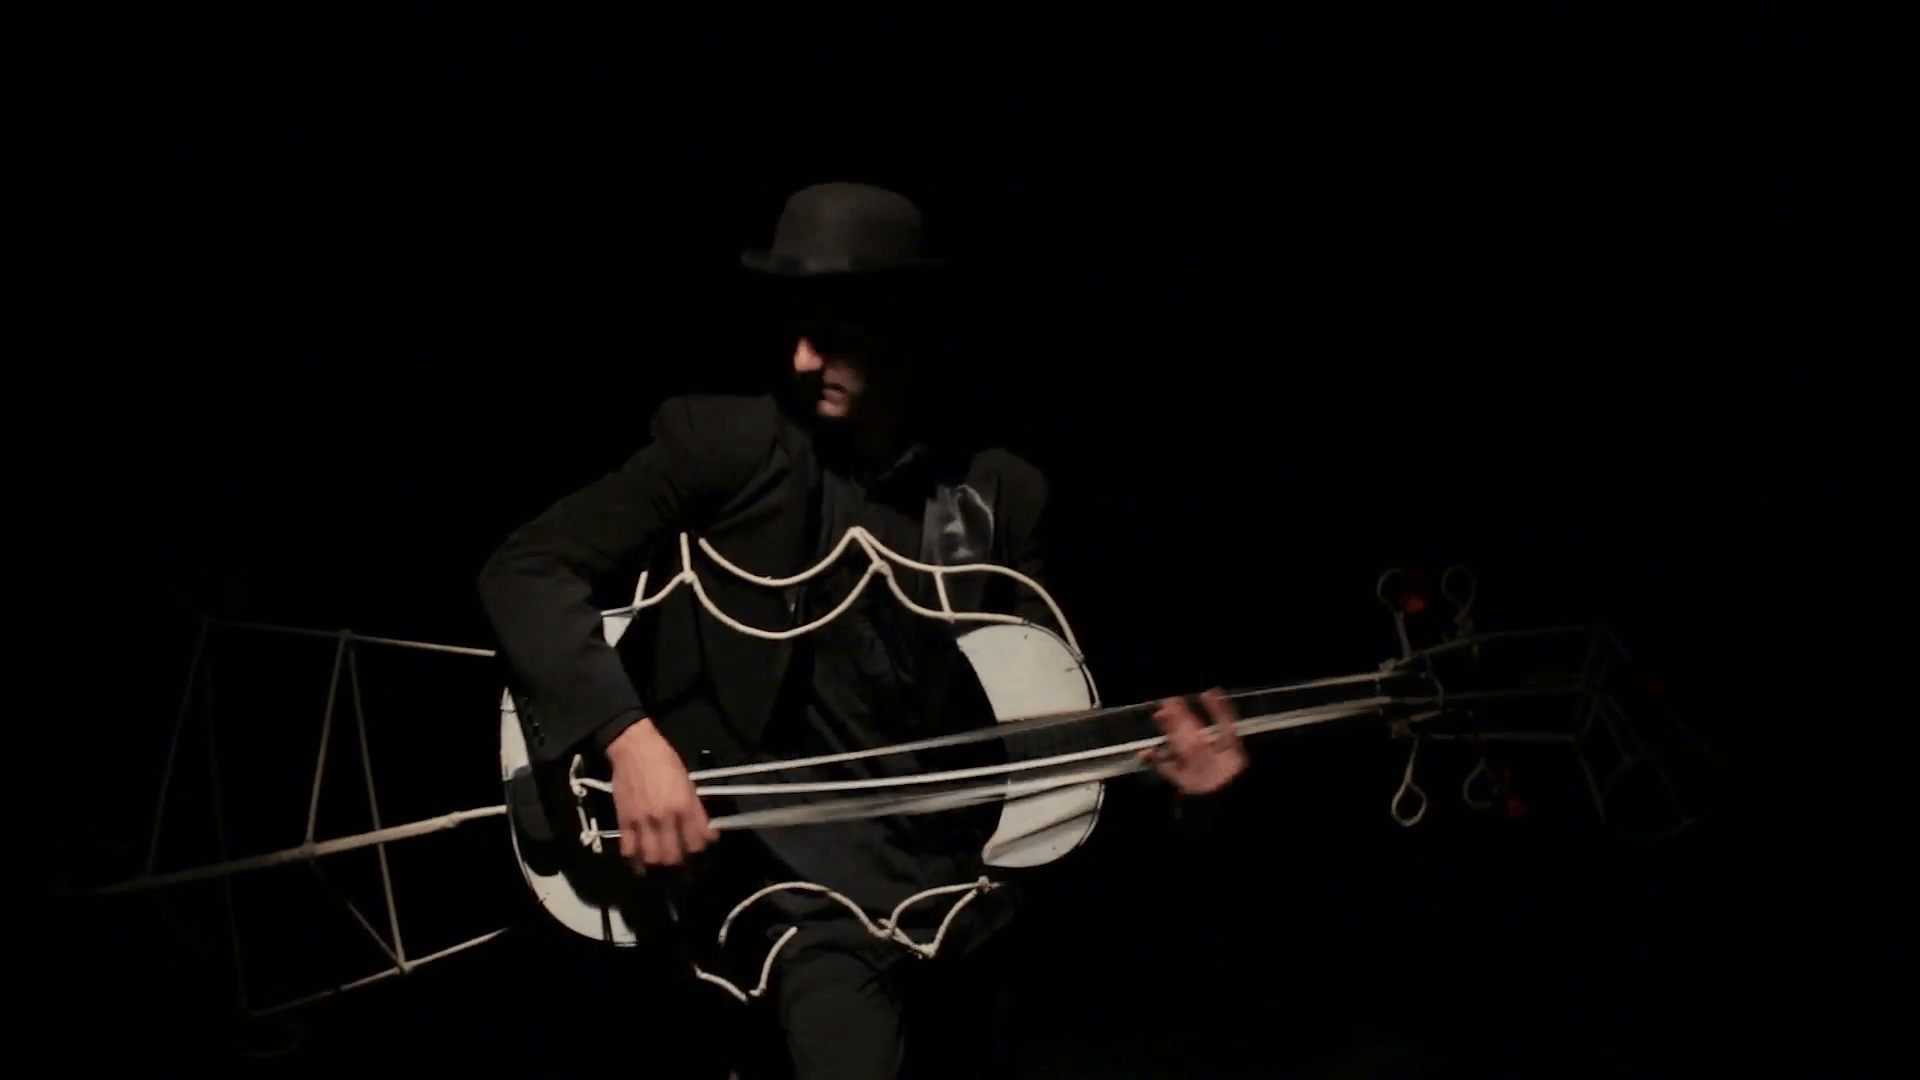 Mime game shows on bass. Black background Stock Video Footage